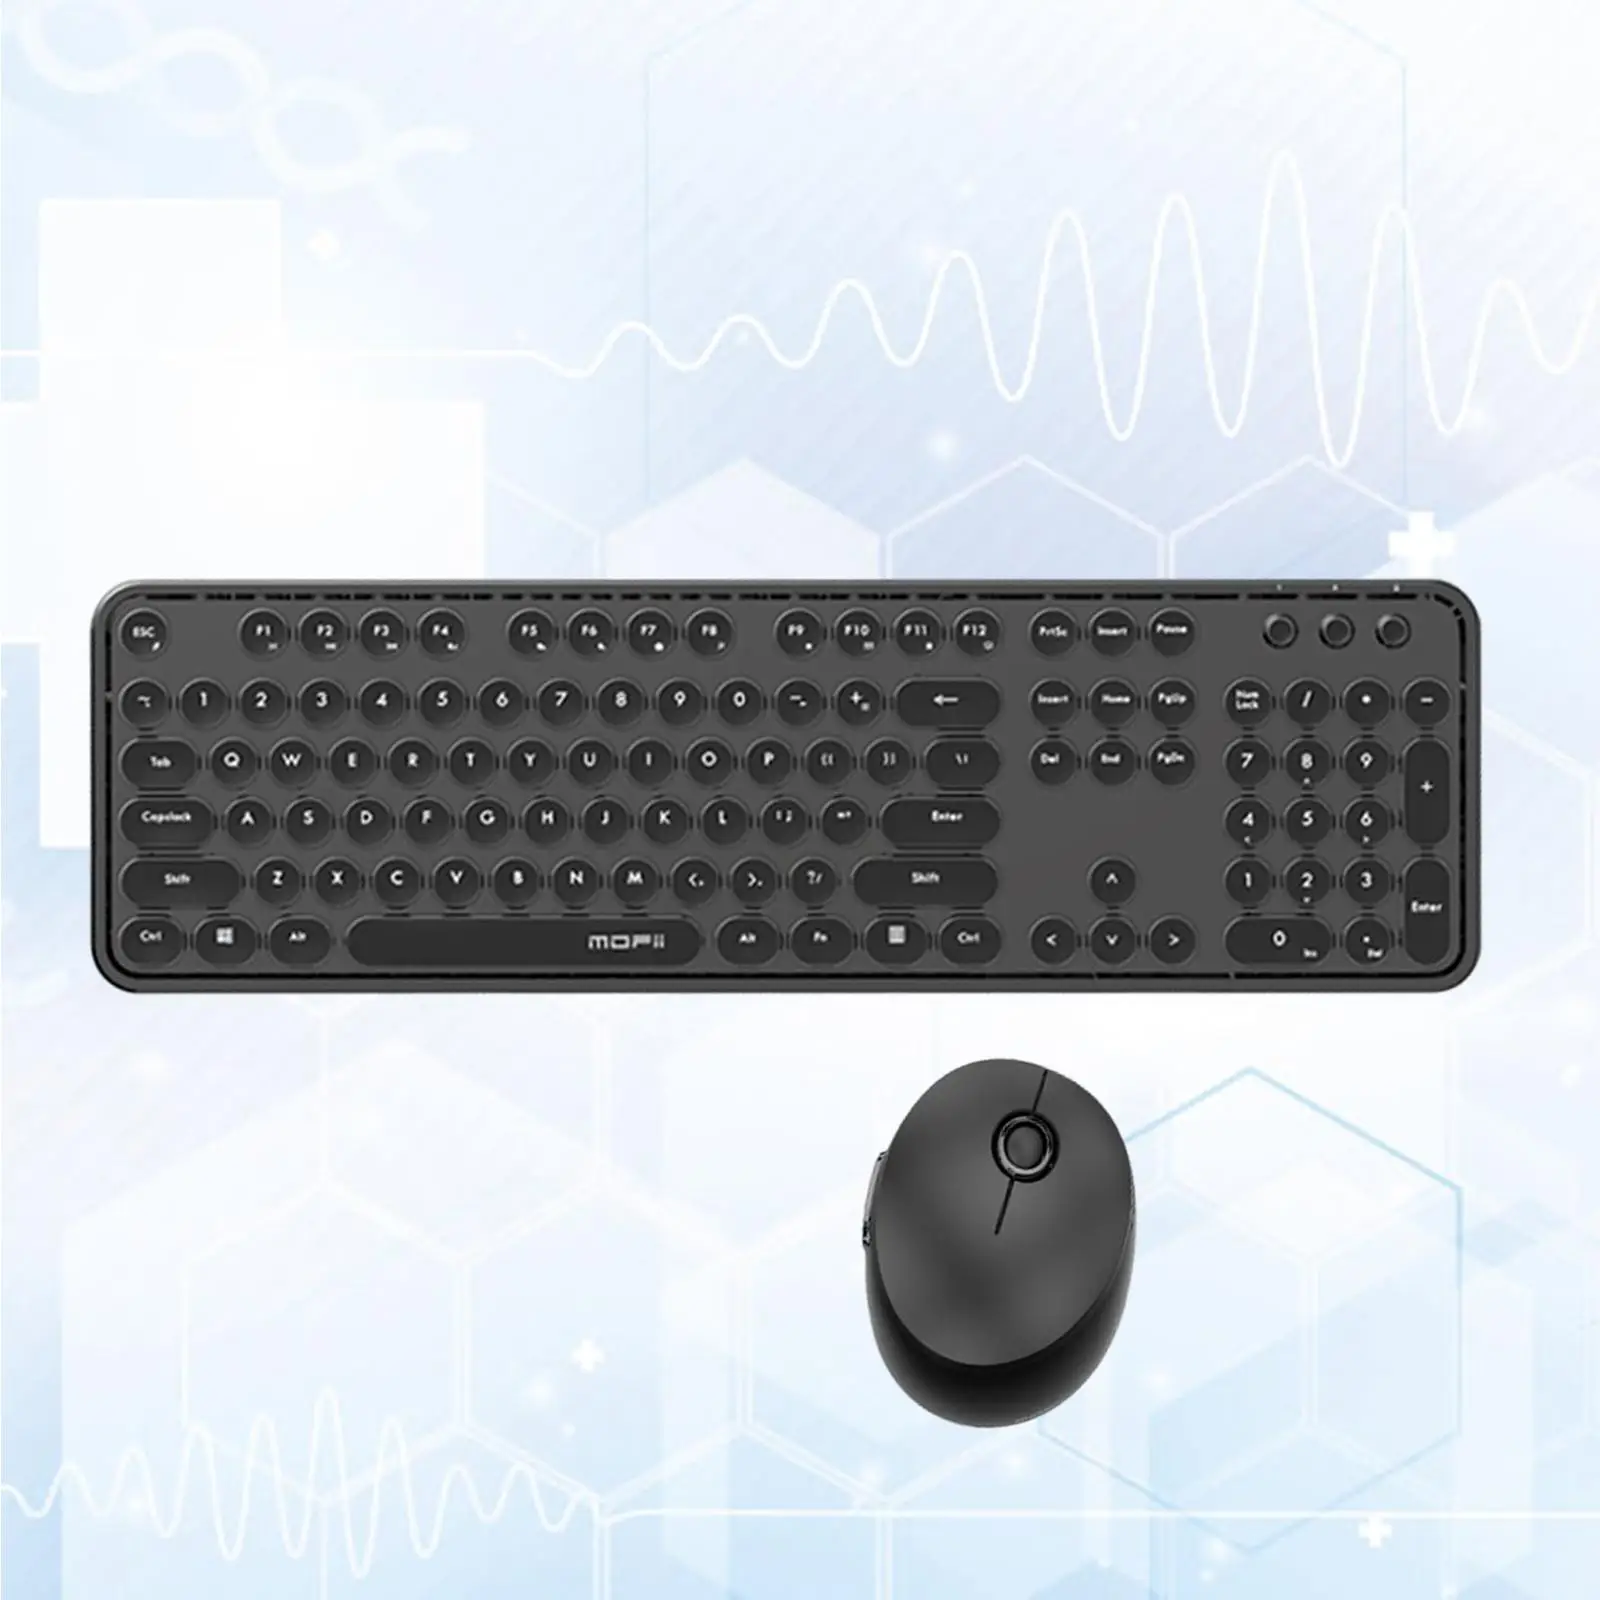 Fashion Desktop Mini Wireless Keyboard with Mouse Comb, with Number Pad